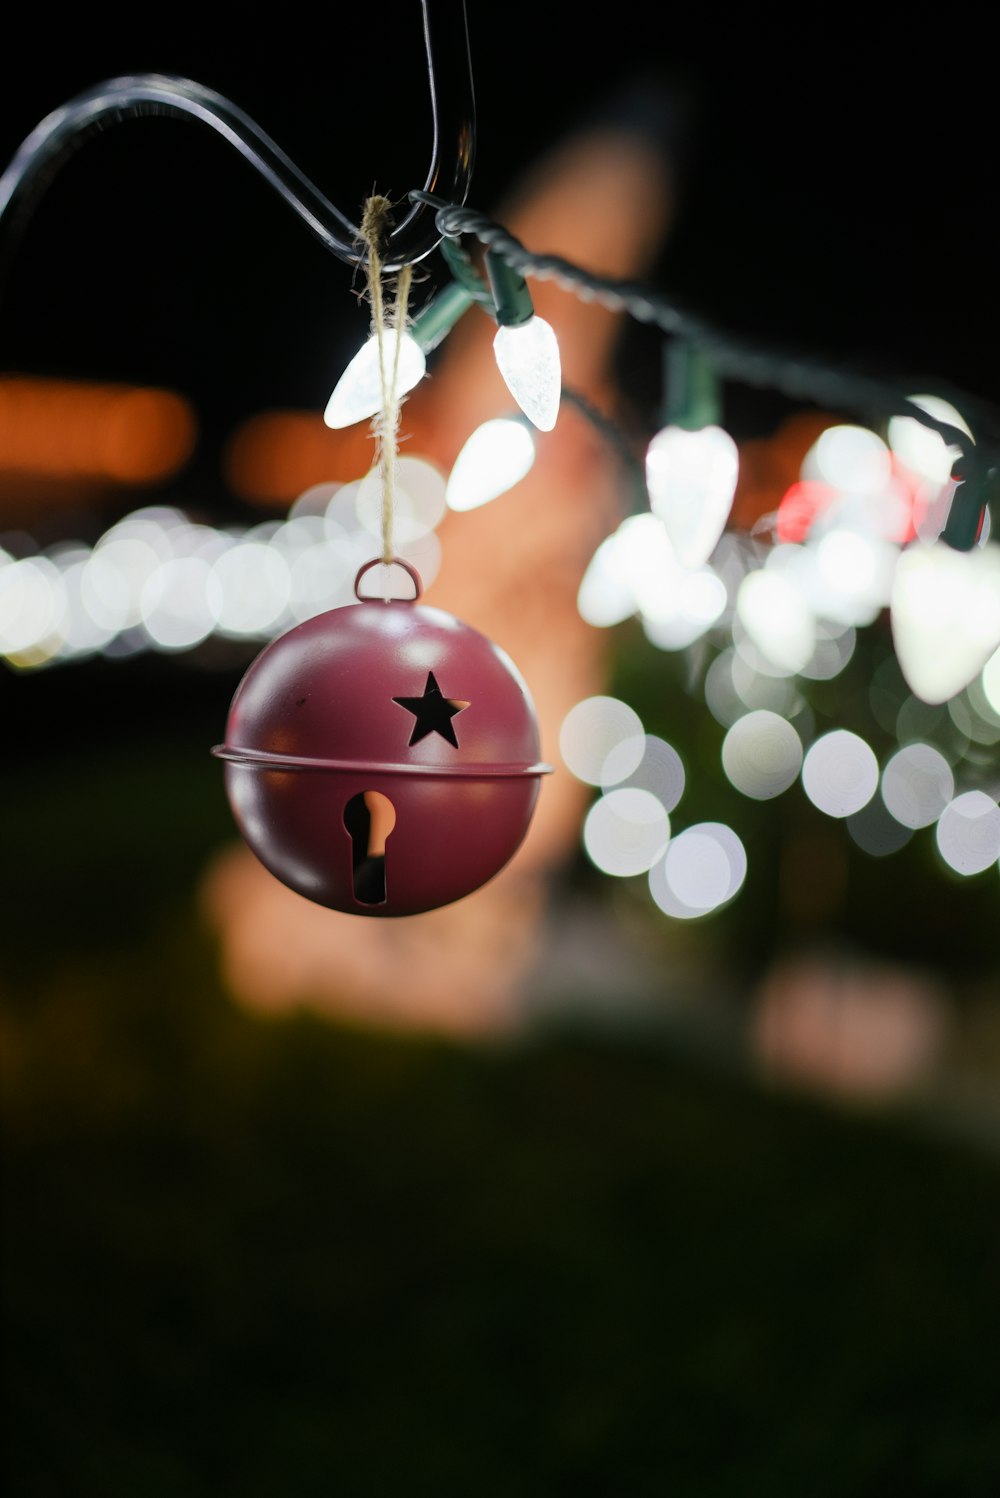 a christmas ornament hanging from a tree with lights in the background